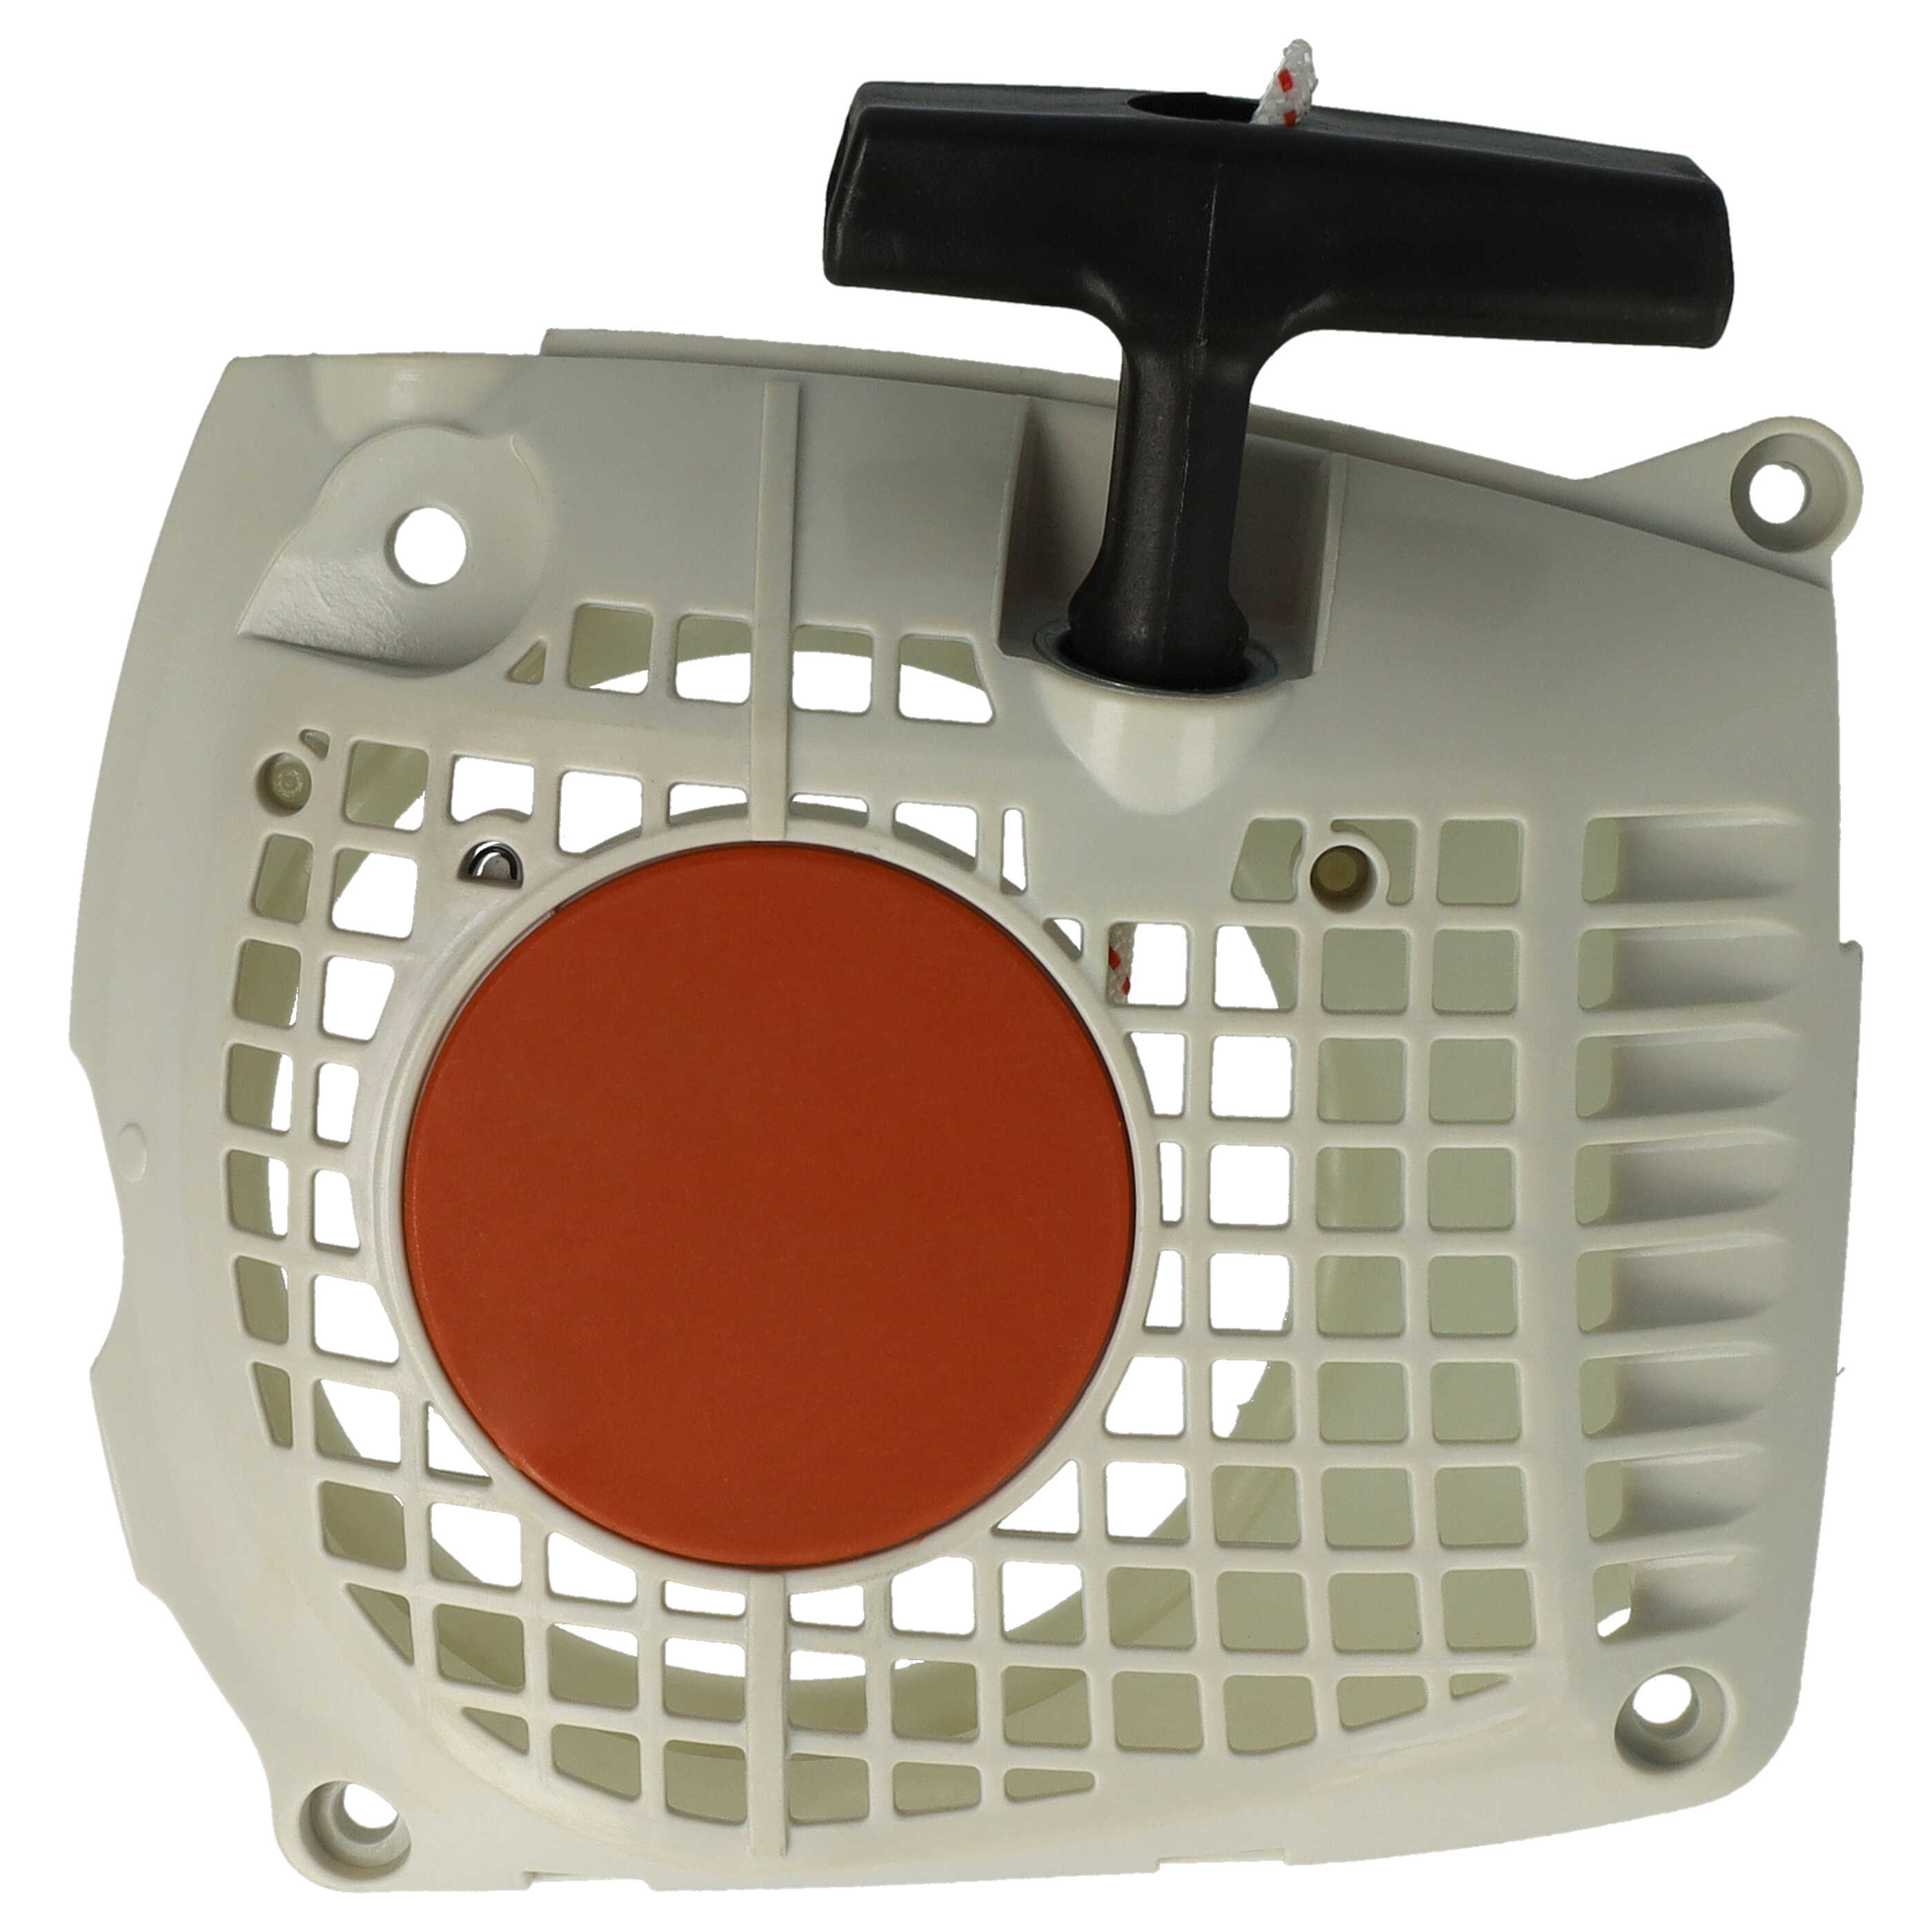 Recoil Starter as Replacement for Stihl 1143 080 2133 suitable for Stihl Power Saw - 15.6 x 15.4 x 3.7 cm